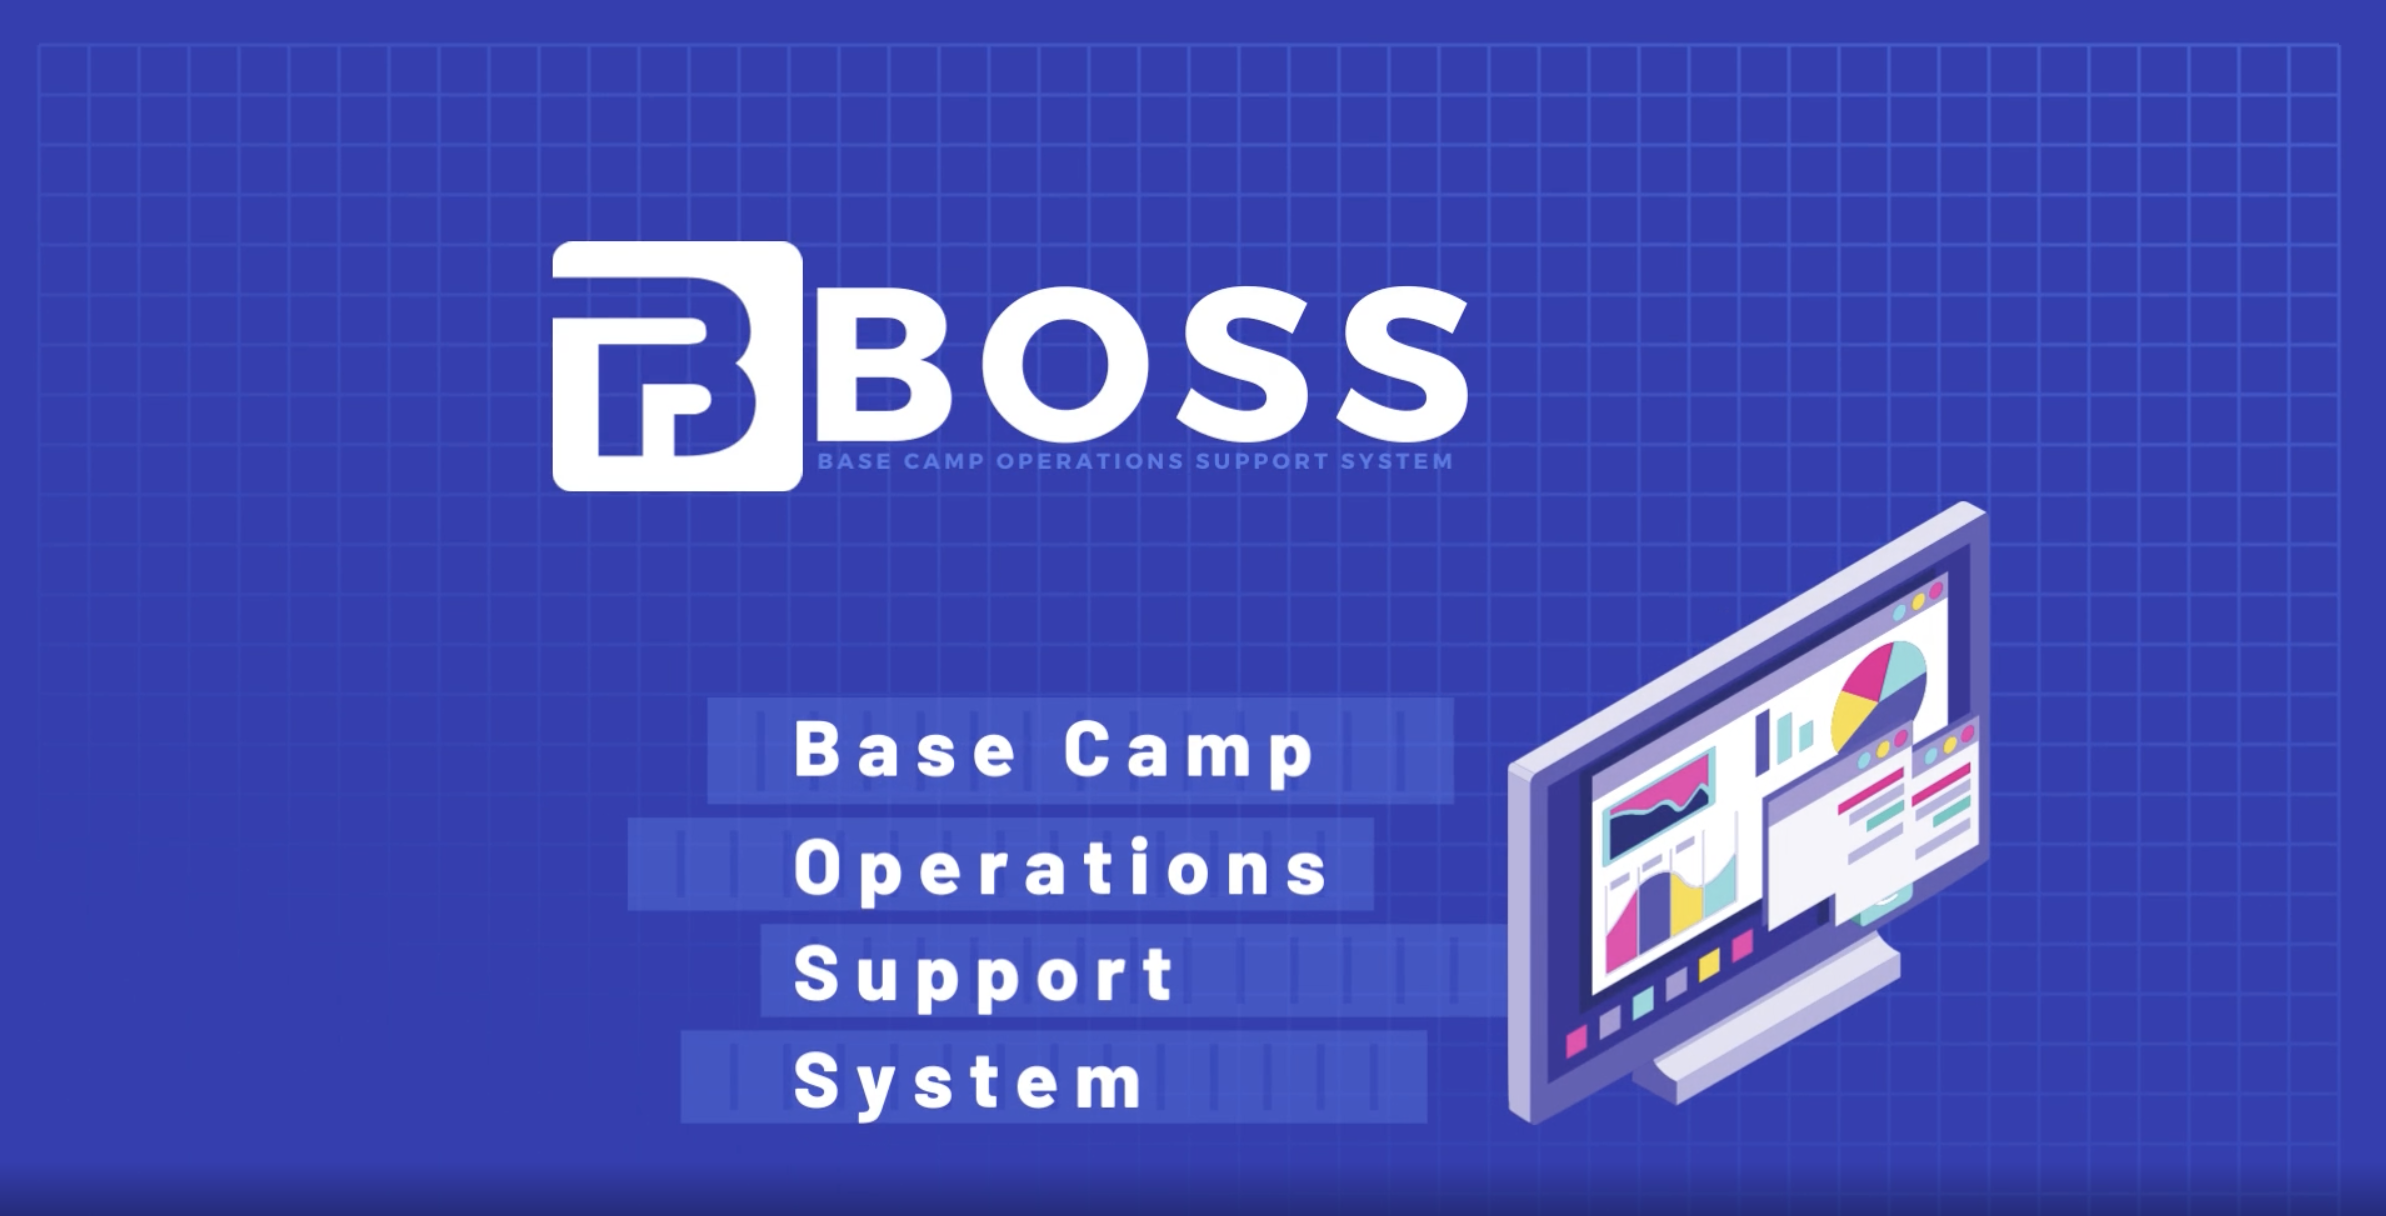 BOSS Base Camp Operations Support System